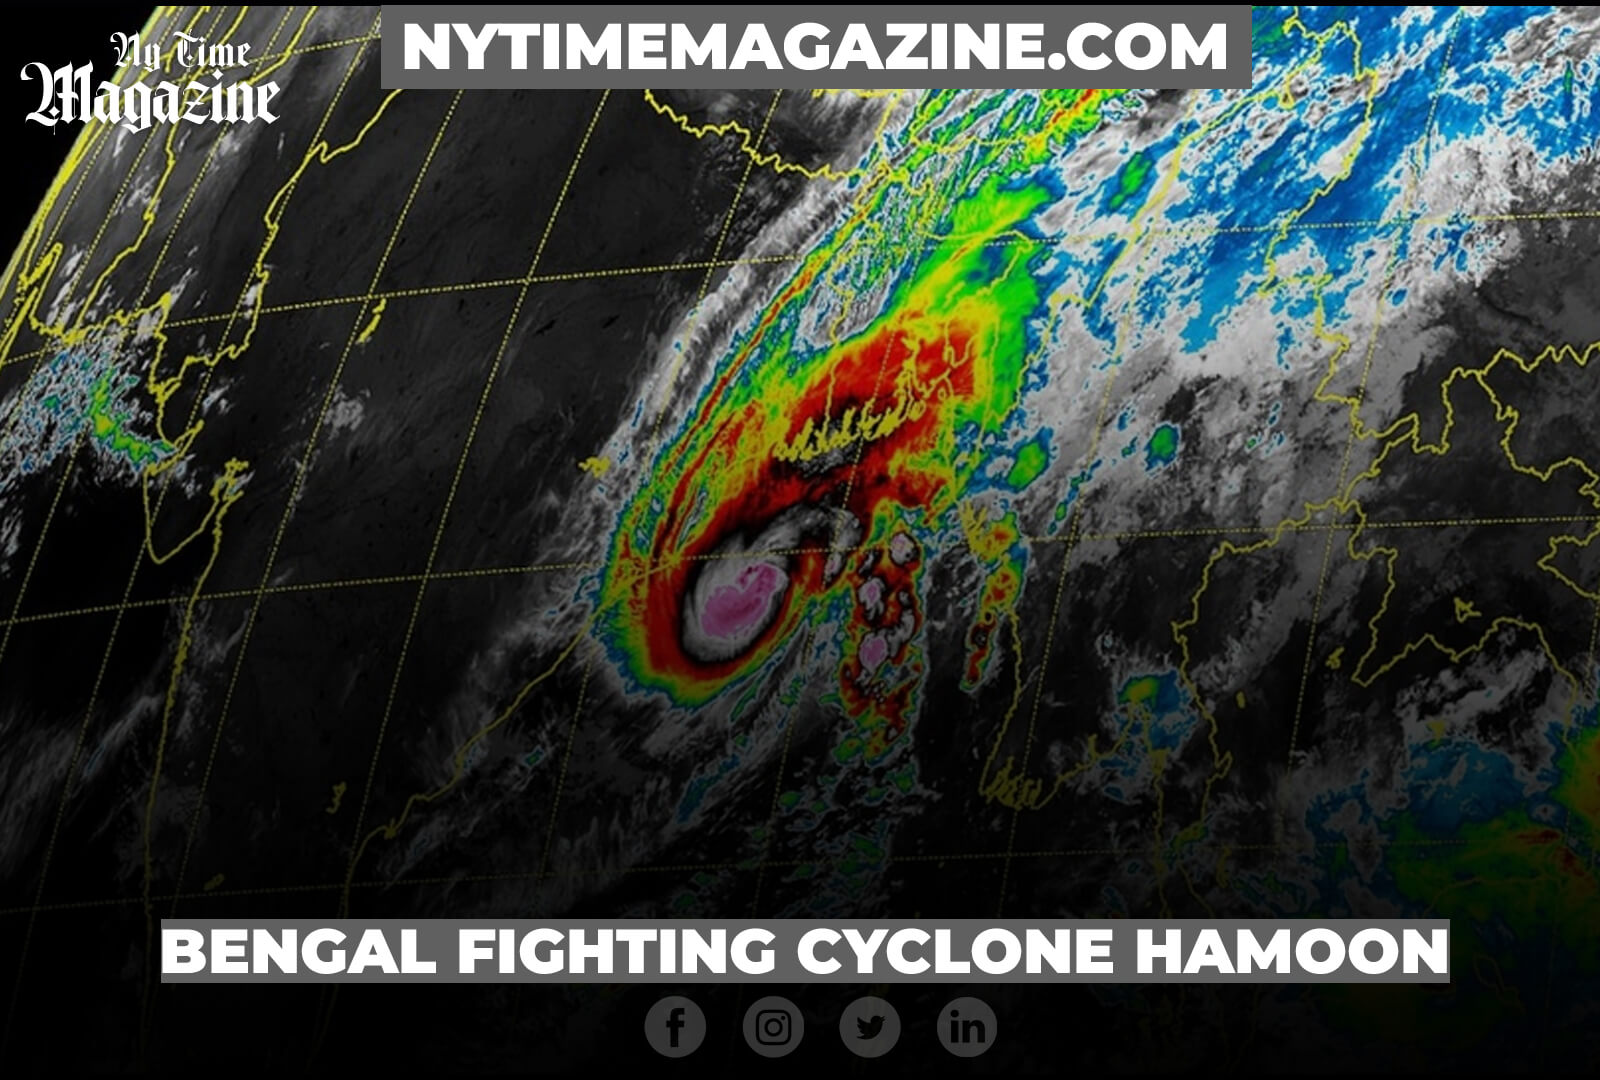 Bengal Fighting Cyclone Hamoon : A very severe cyclone in the North Indian Ocean